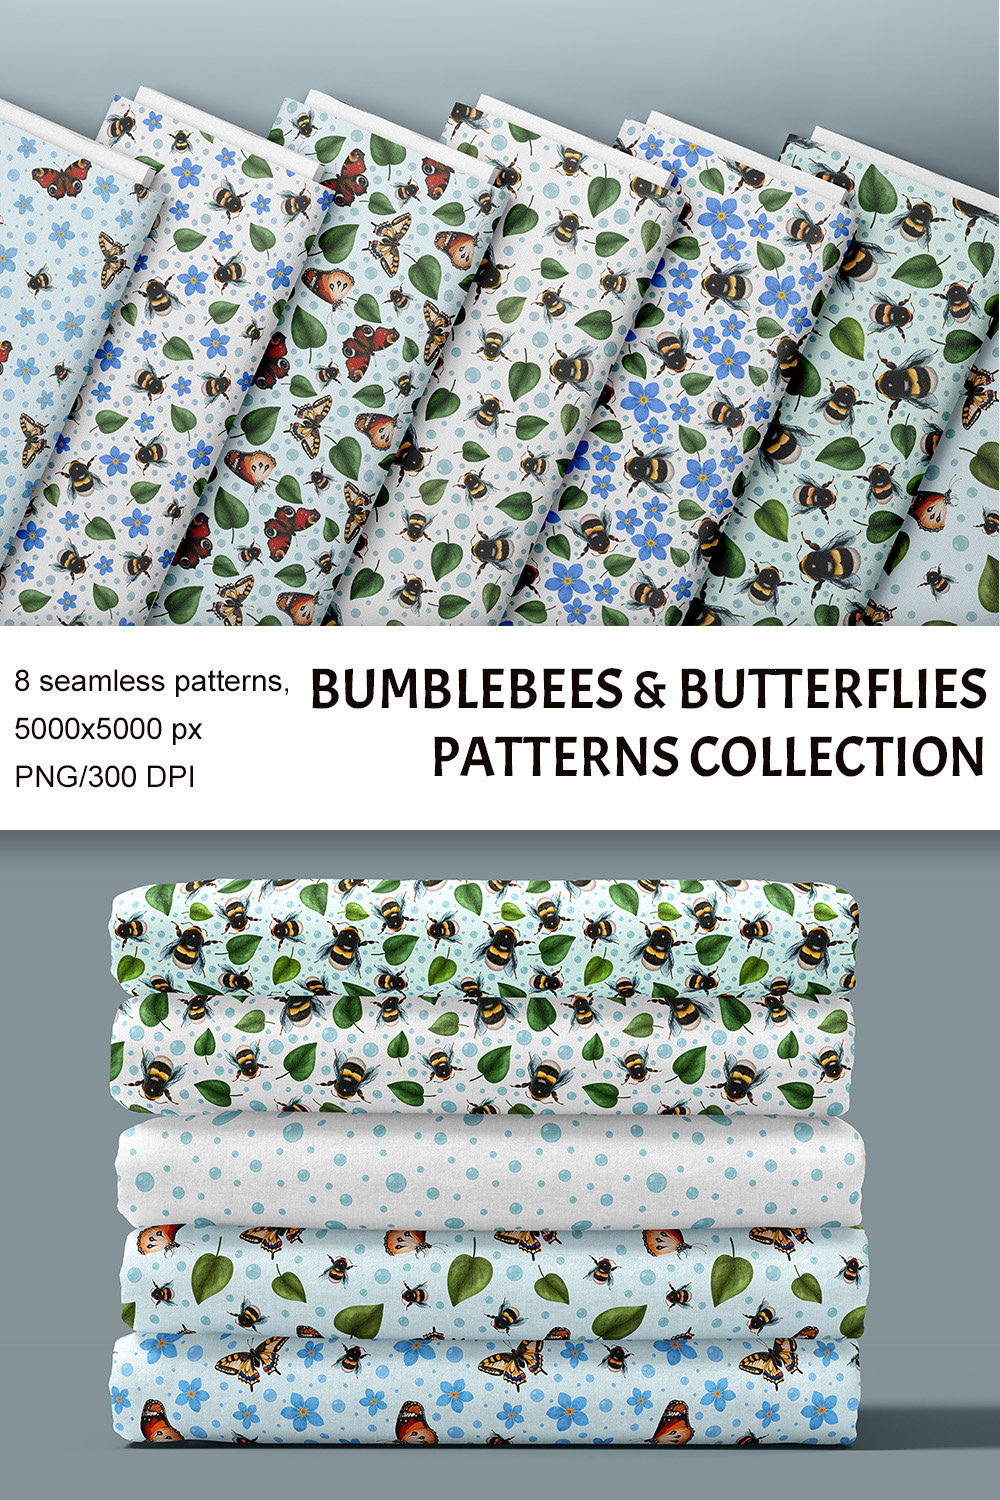 Bumblebees & butterflies patterns collection pinterest preview image.